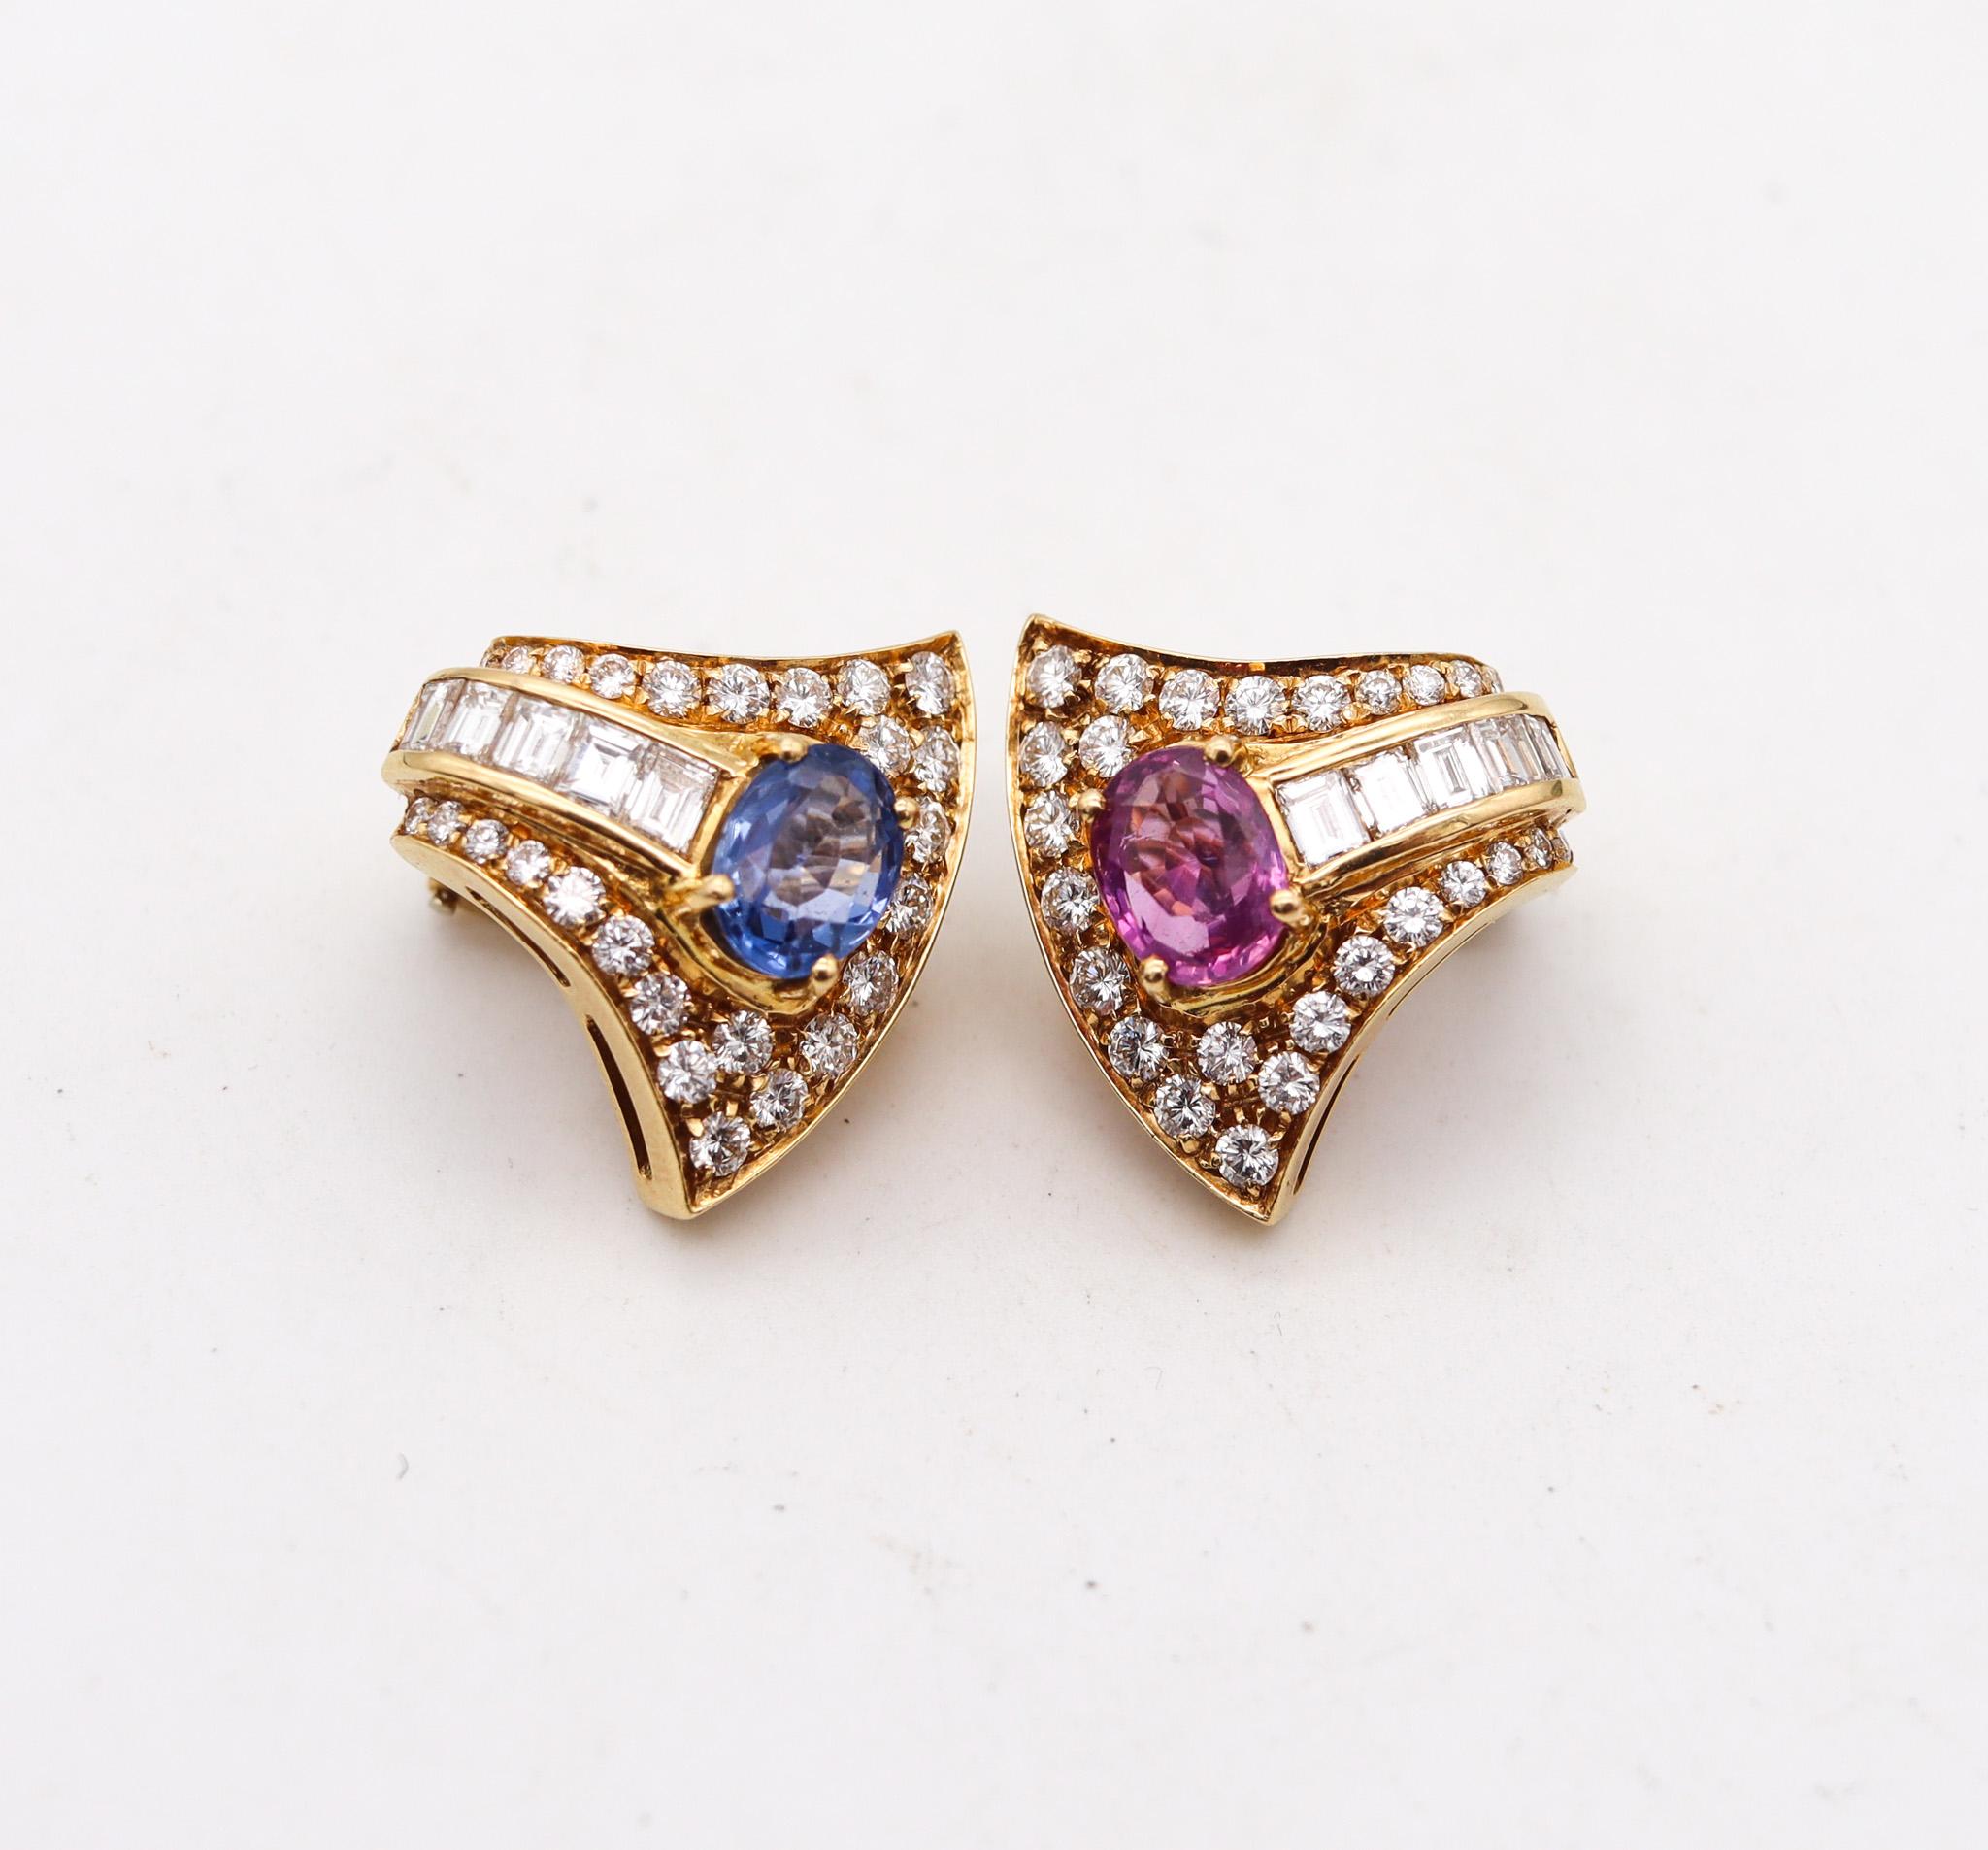 Modernist Bvlgari Clip On Earrings In 18Kt Yellow Gold With 8.93 Ctw Diamonds & Sapphires